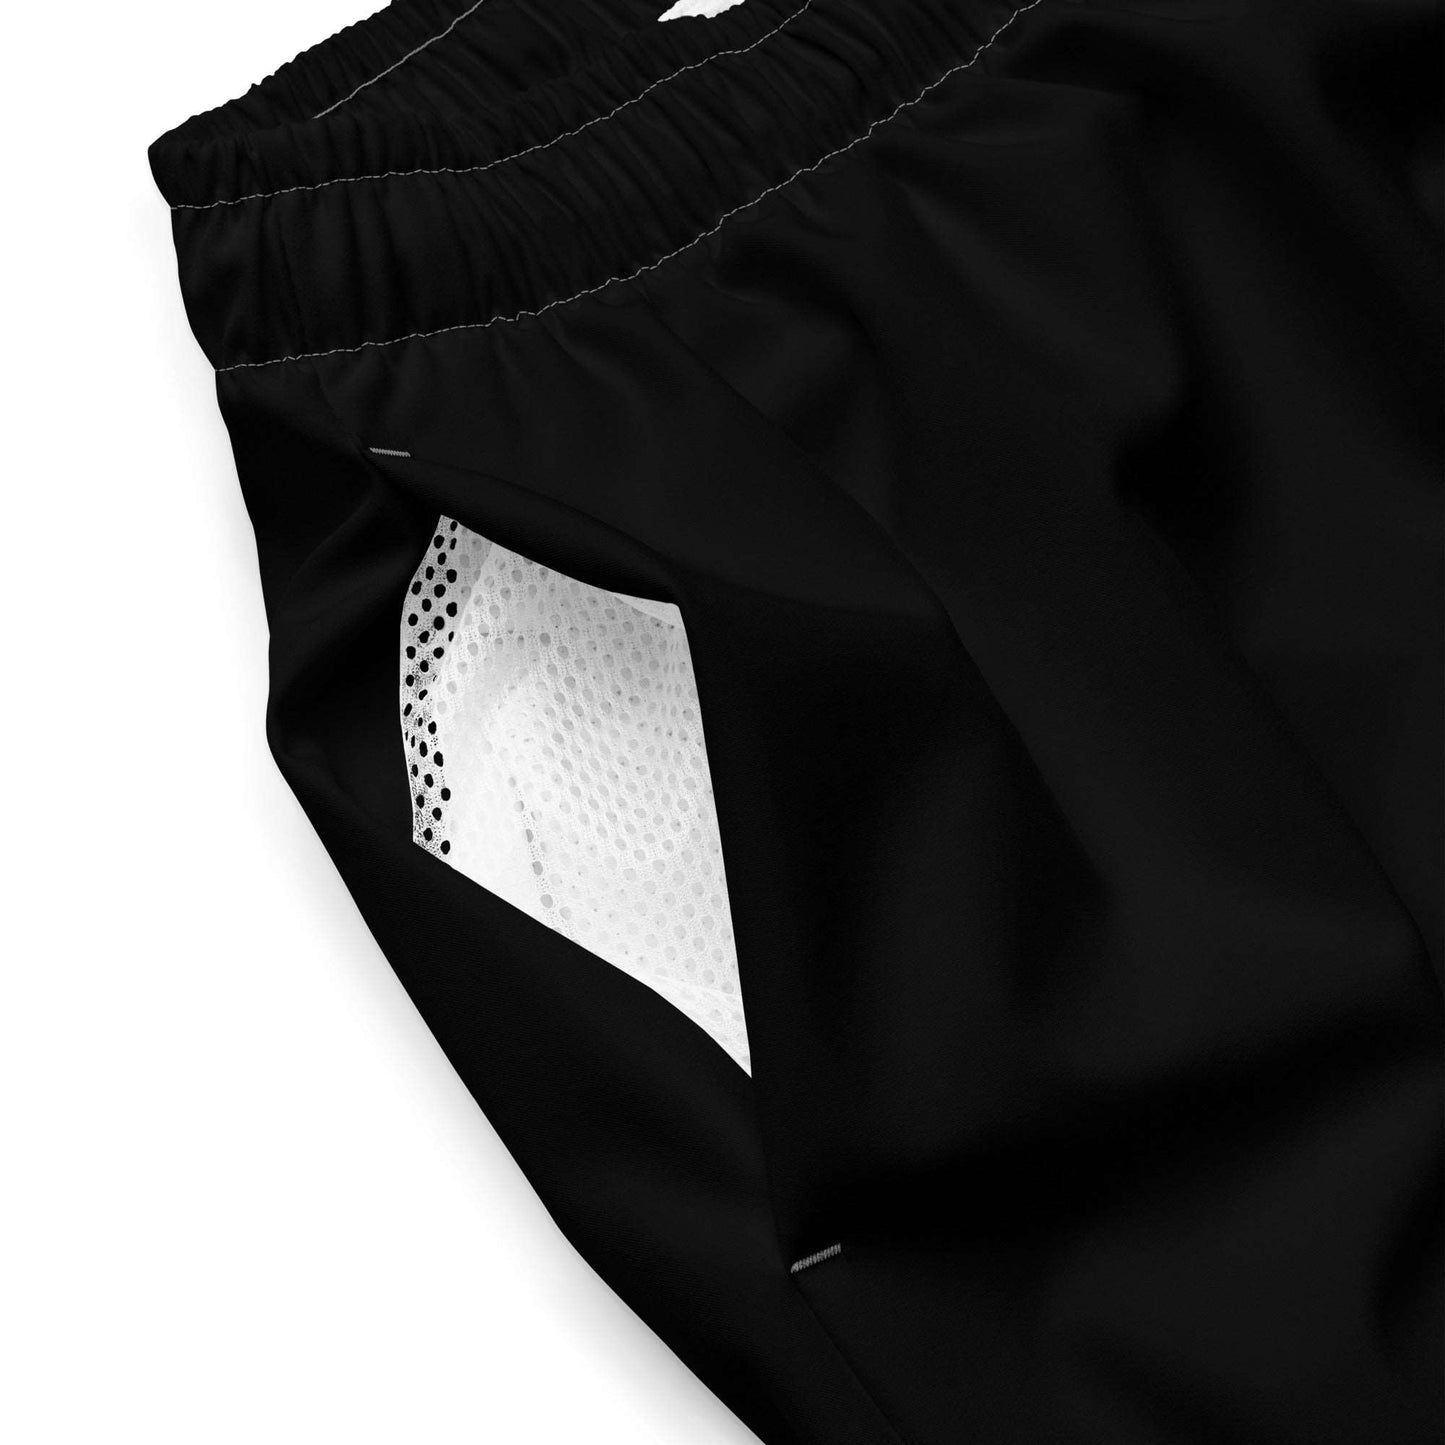 pocket of weirdo tag swim shorts black by B.Different Clothing independent streetwear inspired by street art graffiti